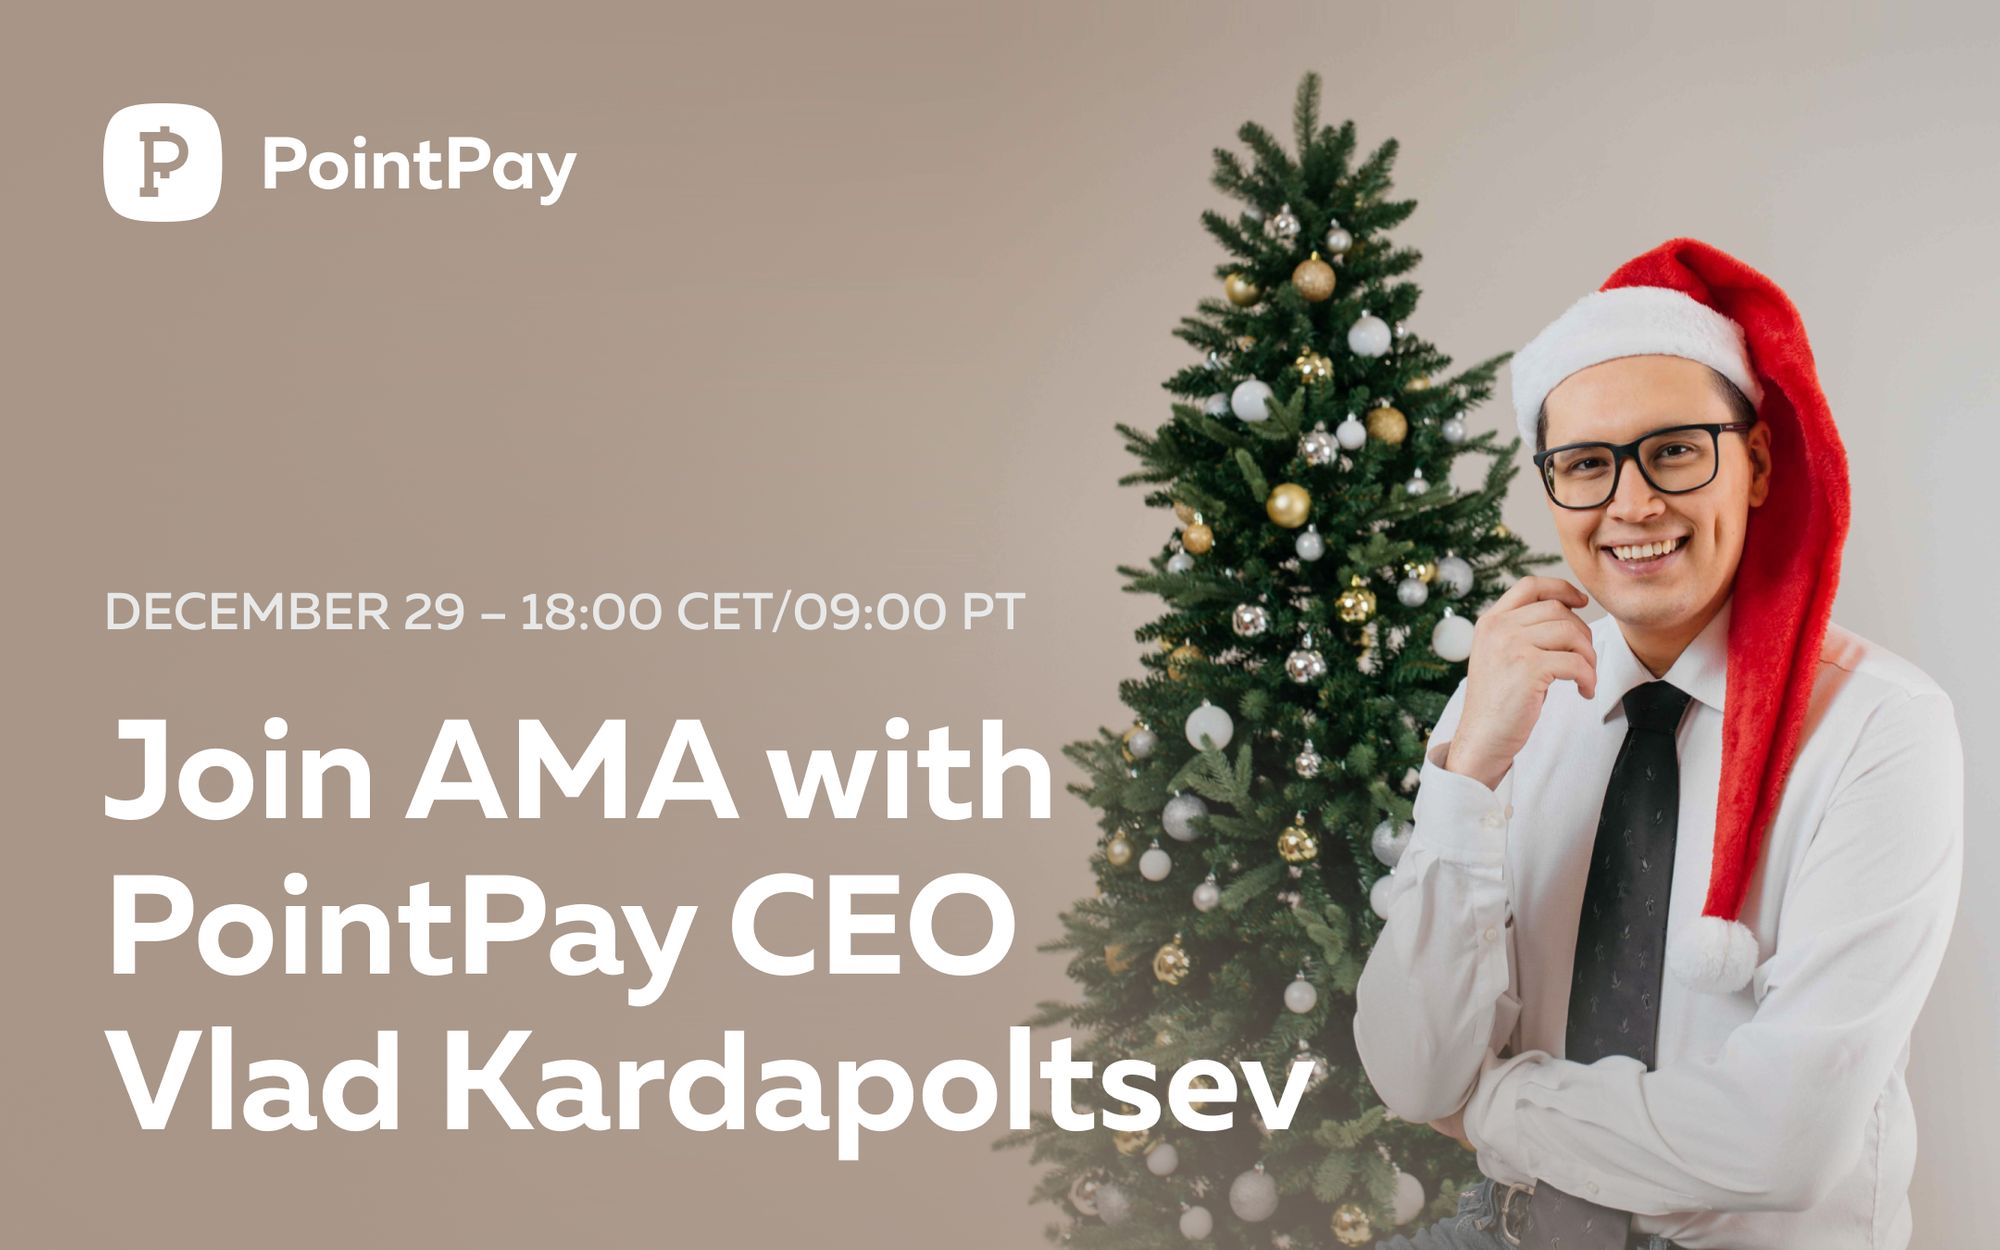 Join AMA with PointPay CEO Vladimir Kardapoltsev on the 29th of December 2022 (18:00 CET time)